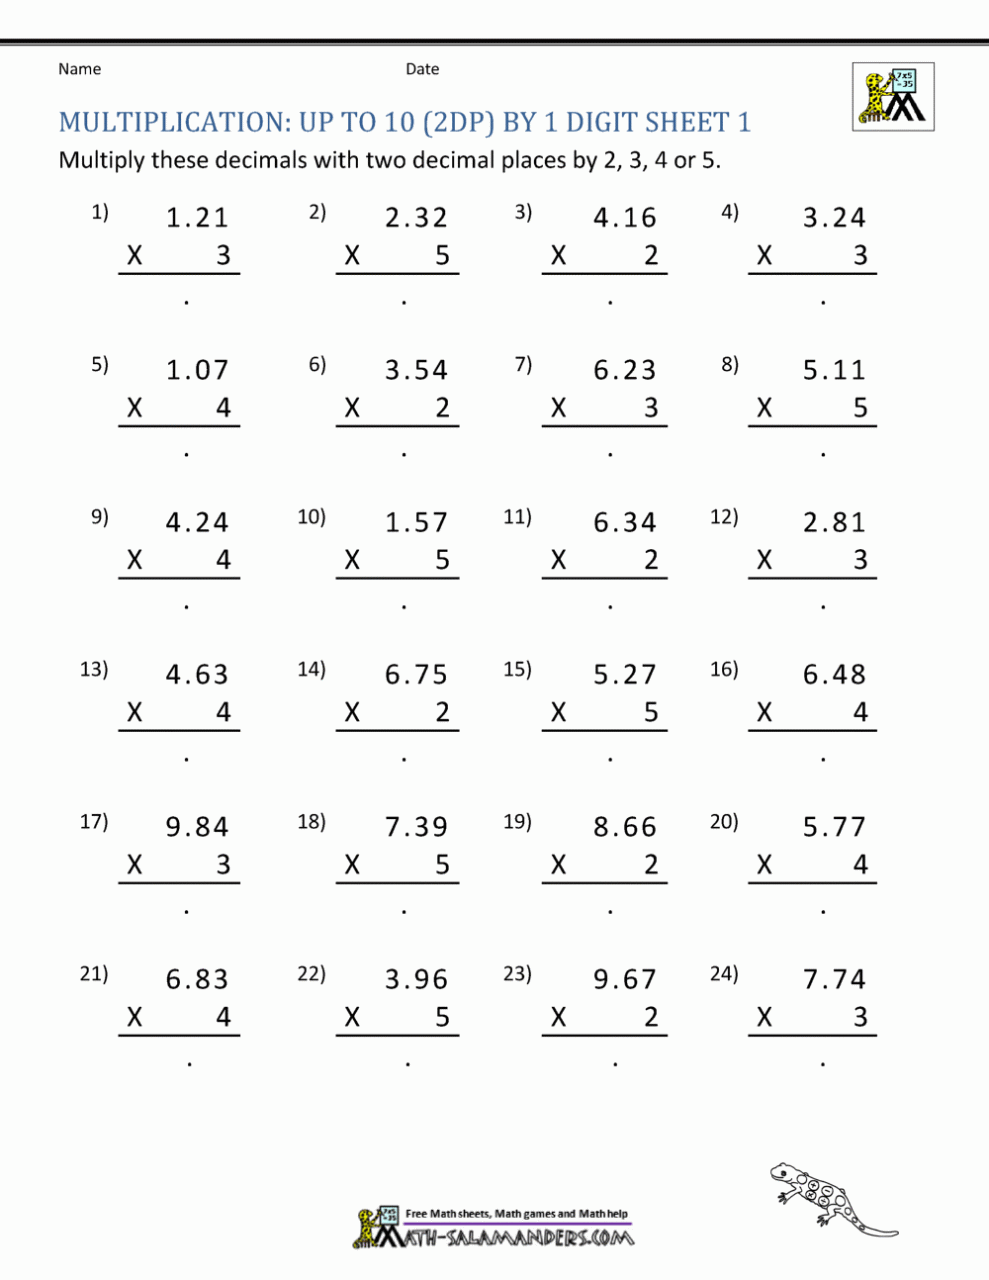 free 5th grade math worksheets multiplication 3 digits 2dp by 1 digit 1